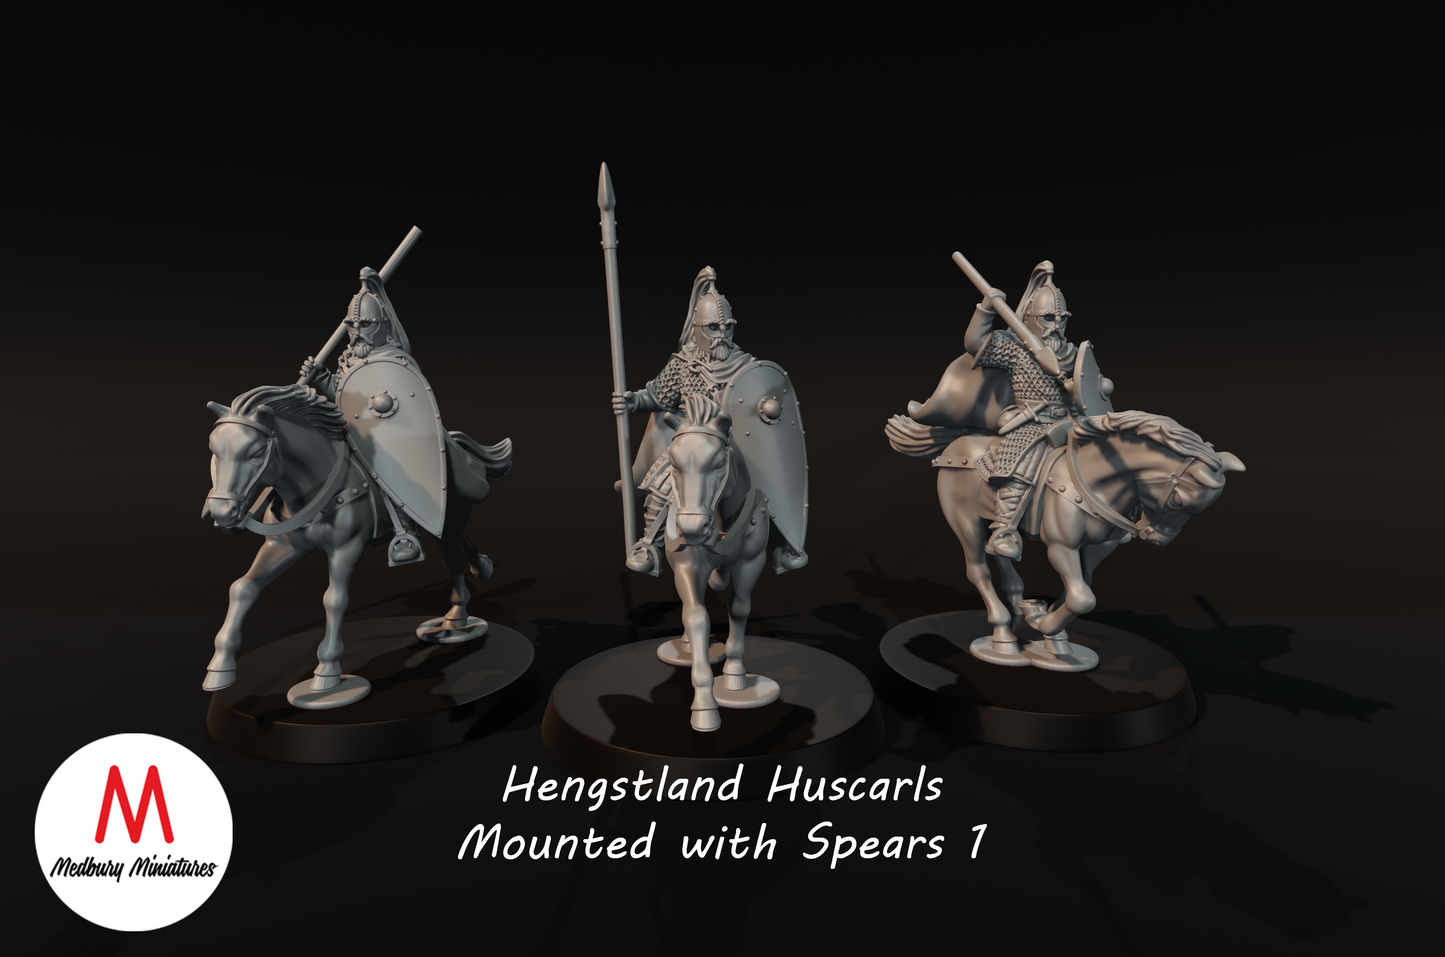 Hengstland Huscarls mounted with spears 1